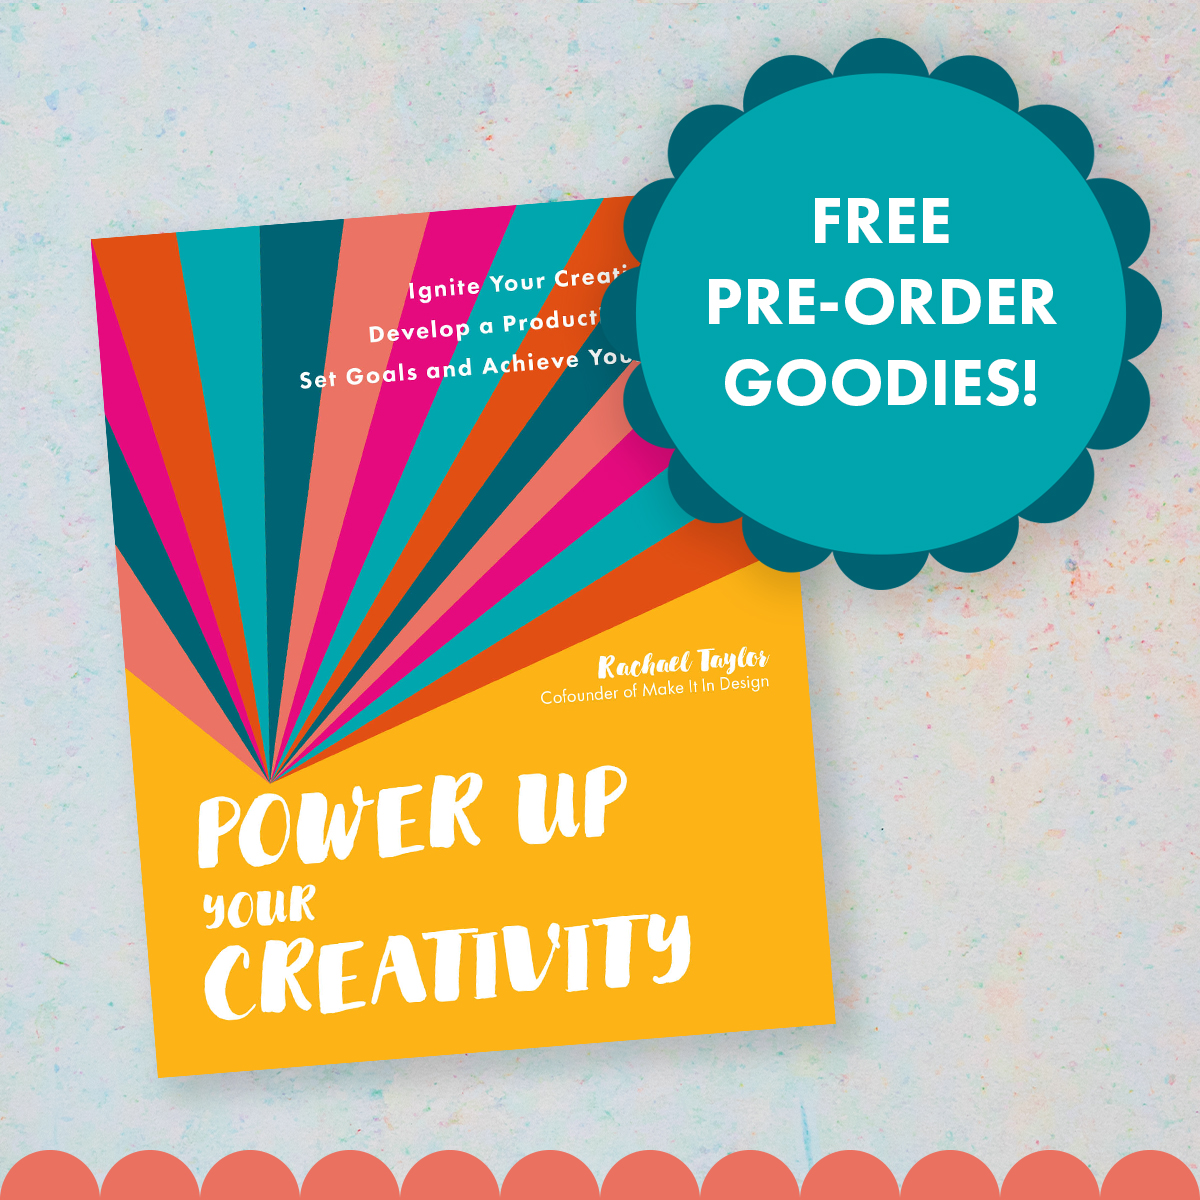 Power Up Your Creativity FREE goodies!